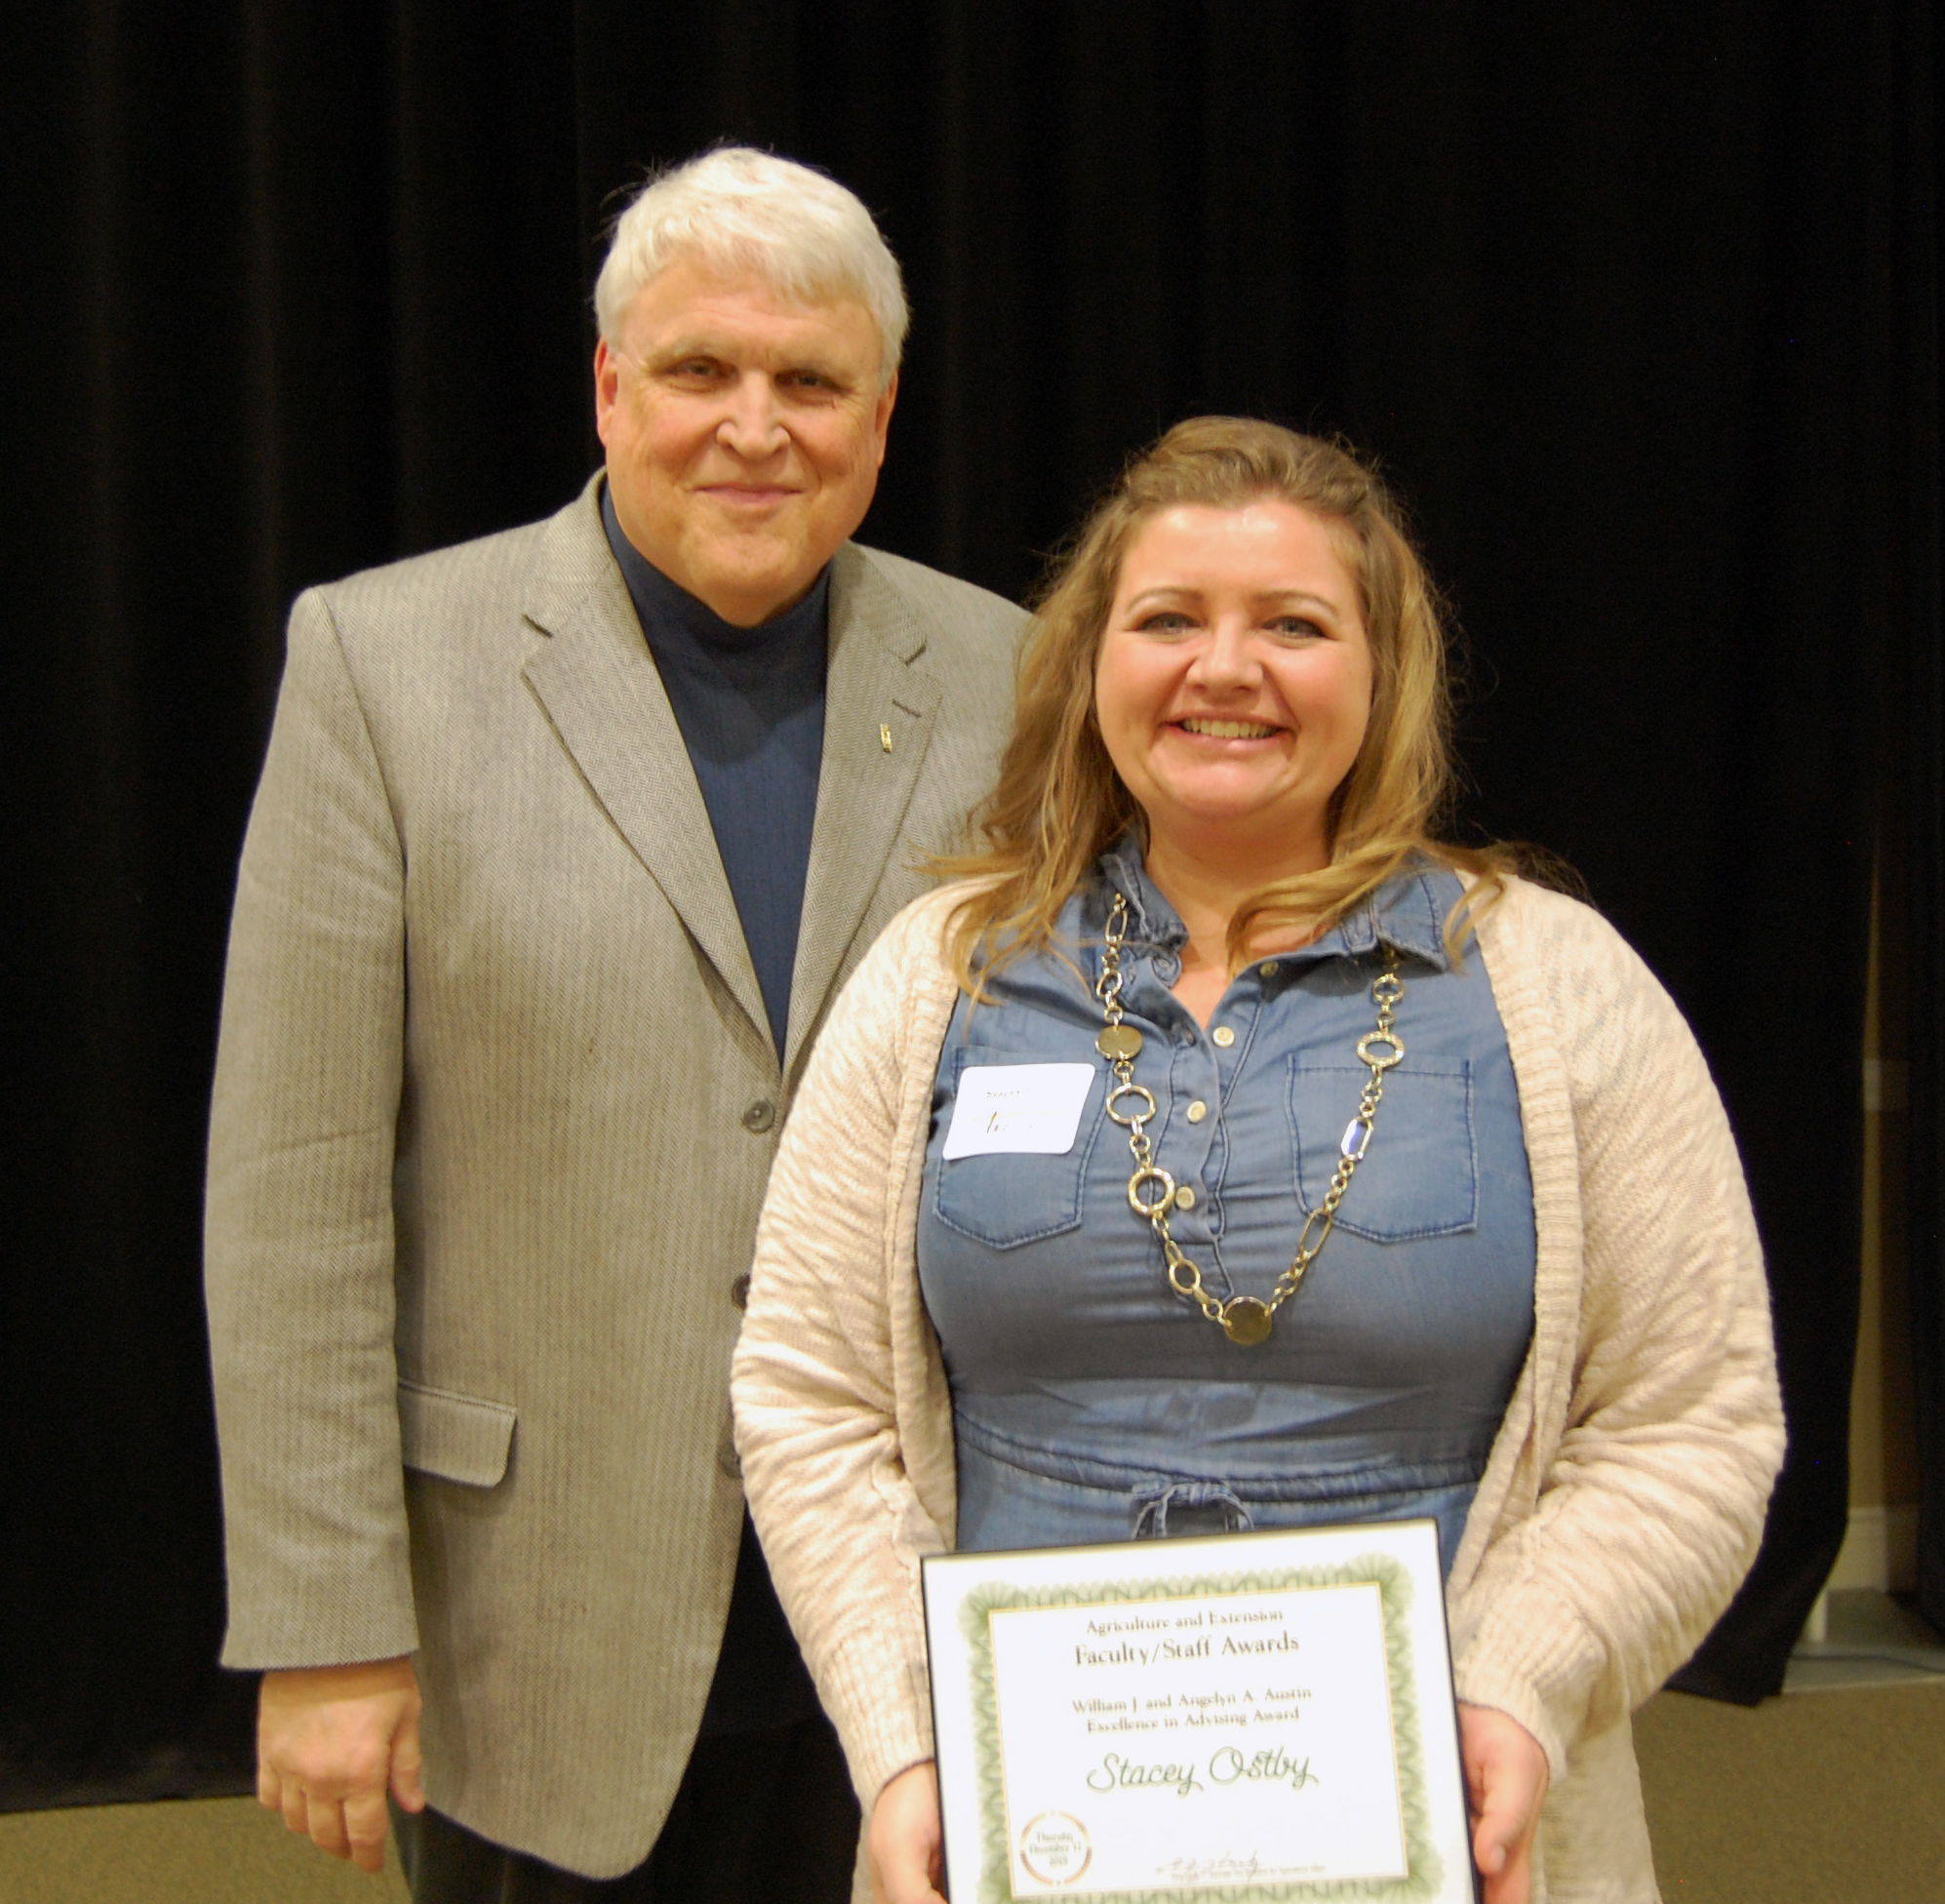 Stacey Ostby, right, receives the William J. and Angelyn A. Austin Excellence in Advising Award from David Buchanan, associate dean for academic programs. (NDSU photo)